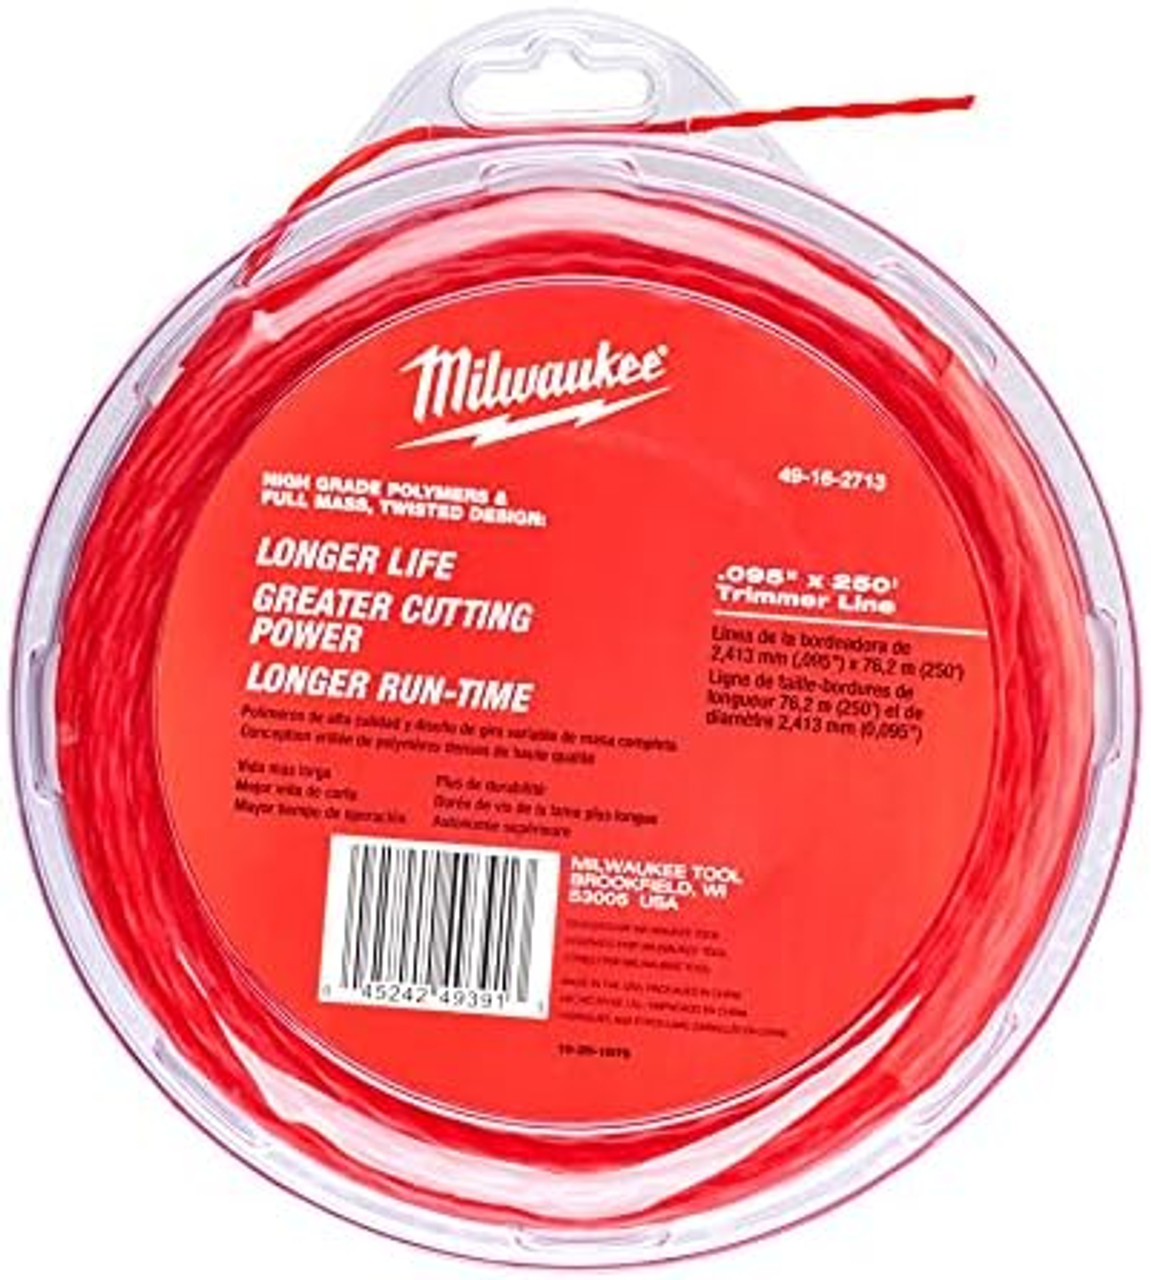 Milwaukee 0.095 in. x 250 ft. Trimmer Line